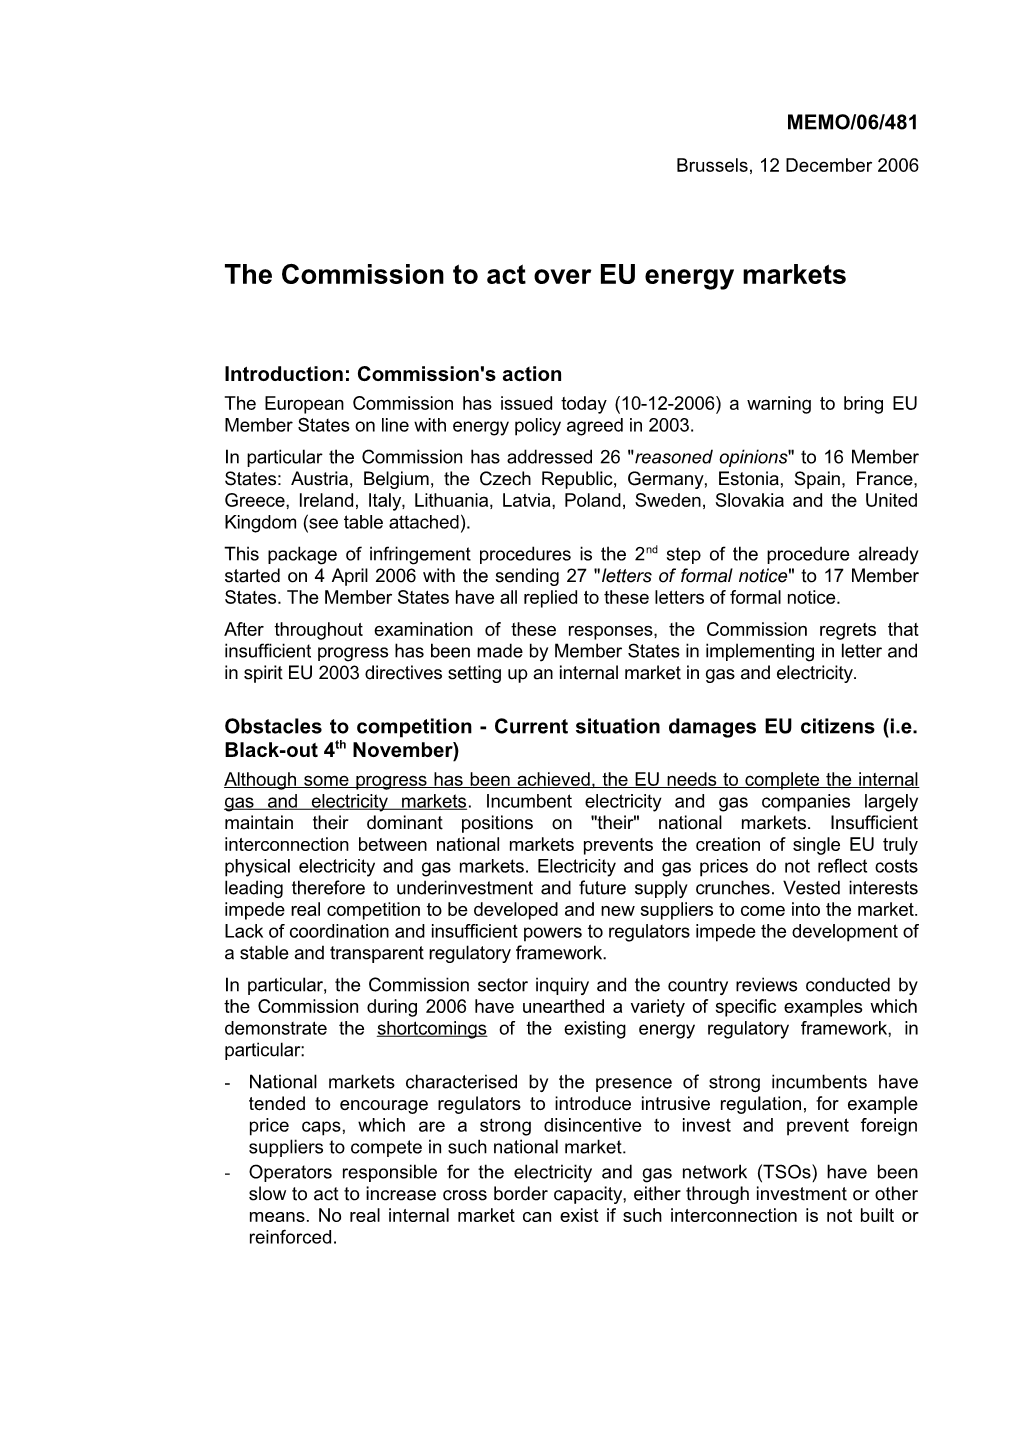 The Commission to Act Over EU Energy Markets